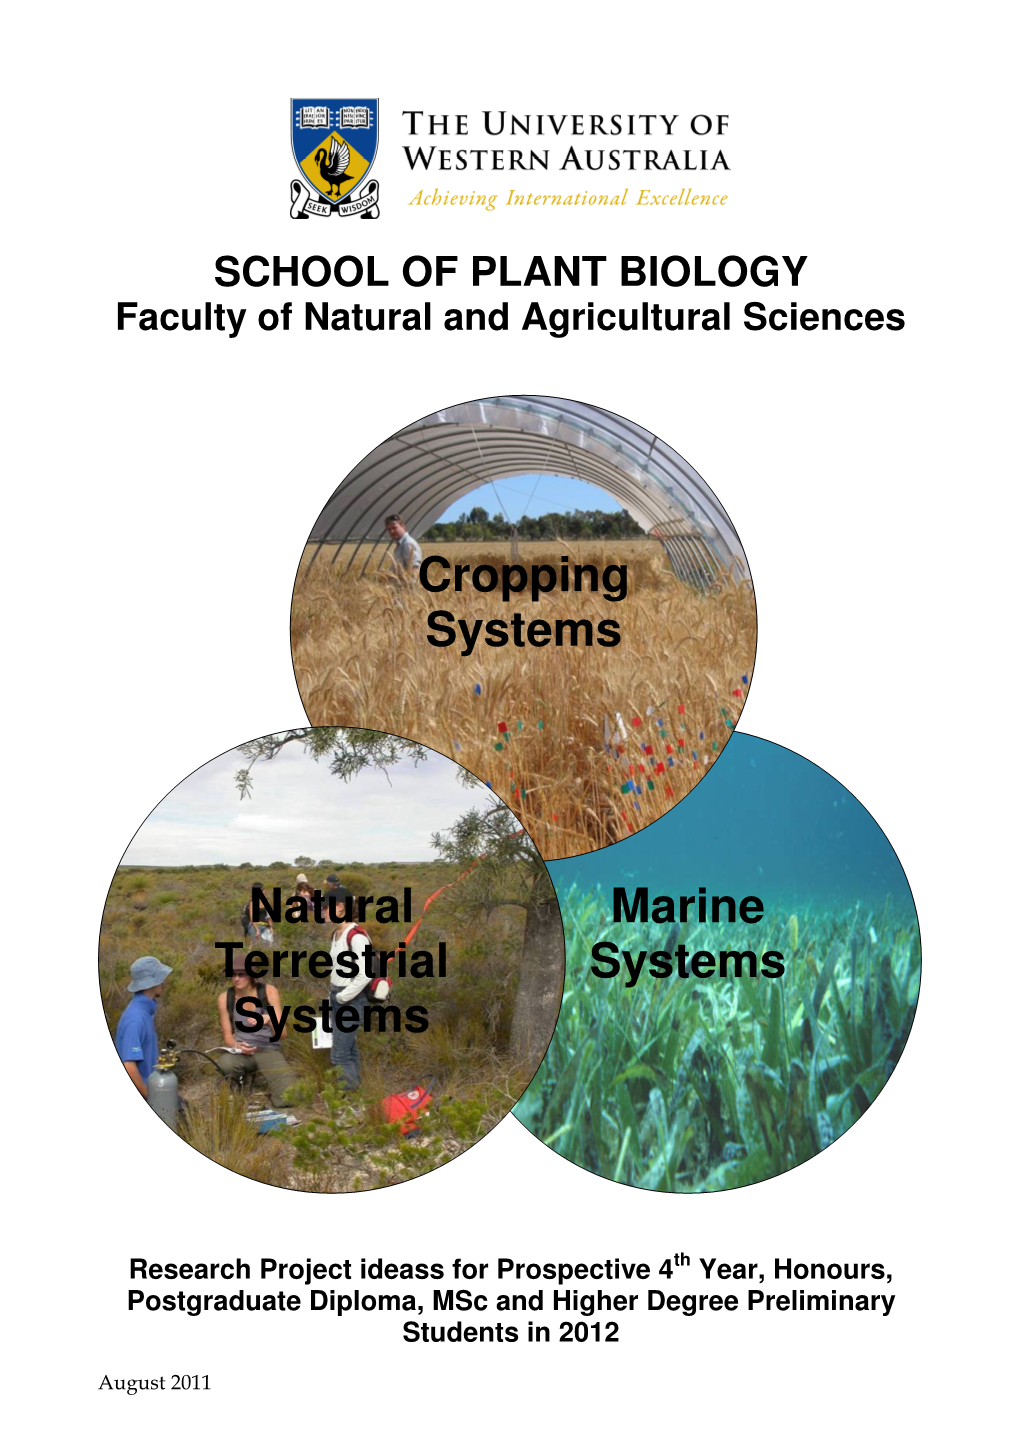 The School of Plant Biology